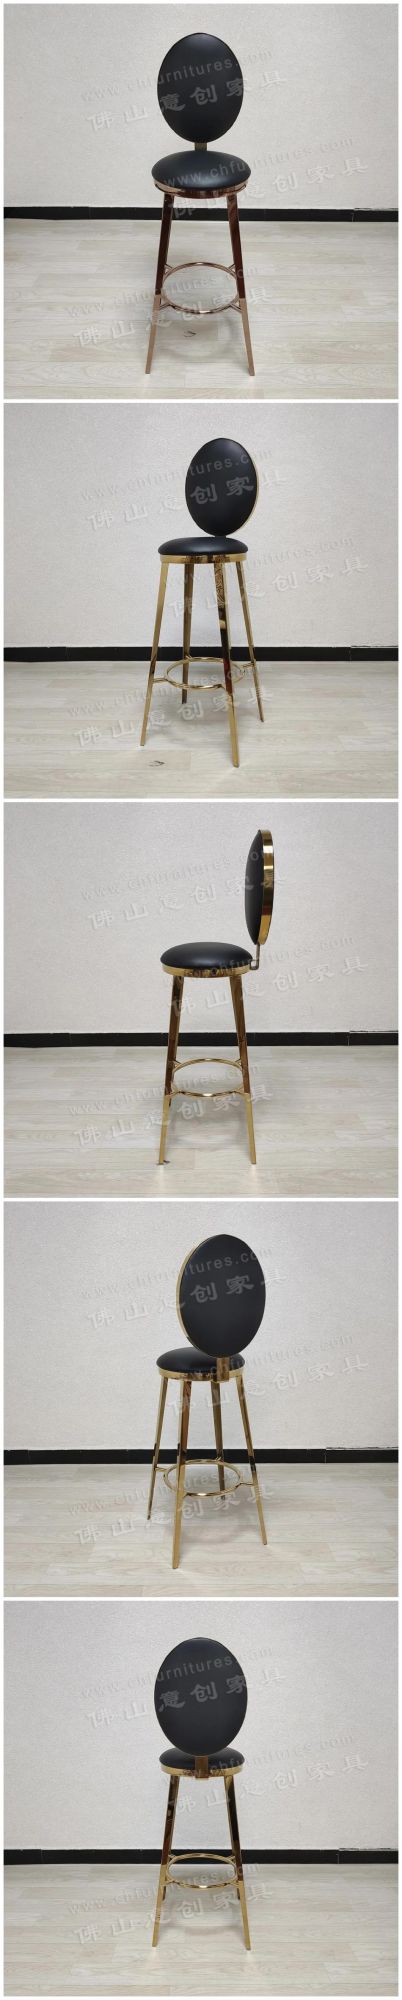 Ss63 Bar Stools High Stools Stainless Steel Household Backrest Bar Stools Modern Minimalist High Chairs Bar Chairs